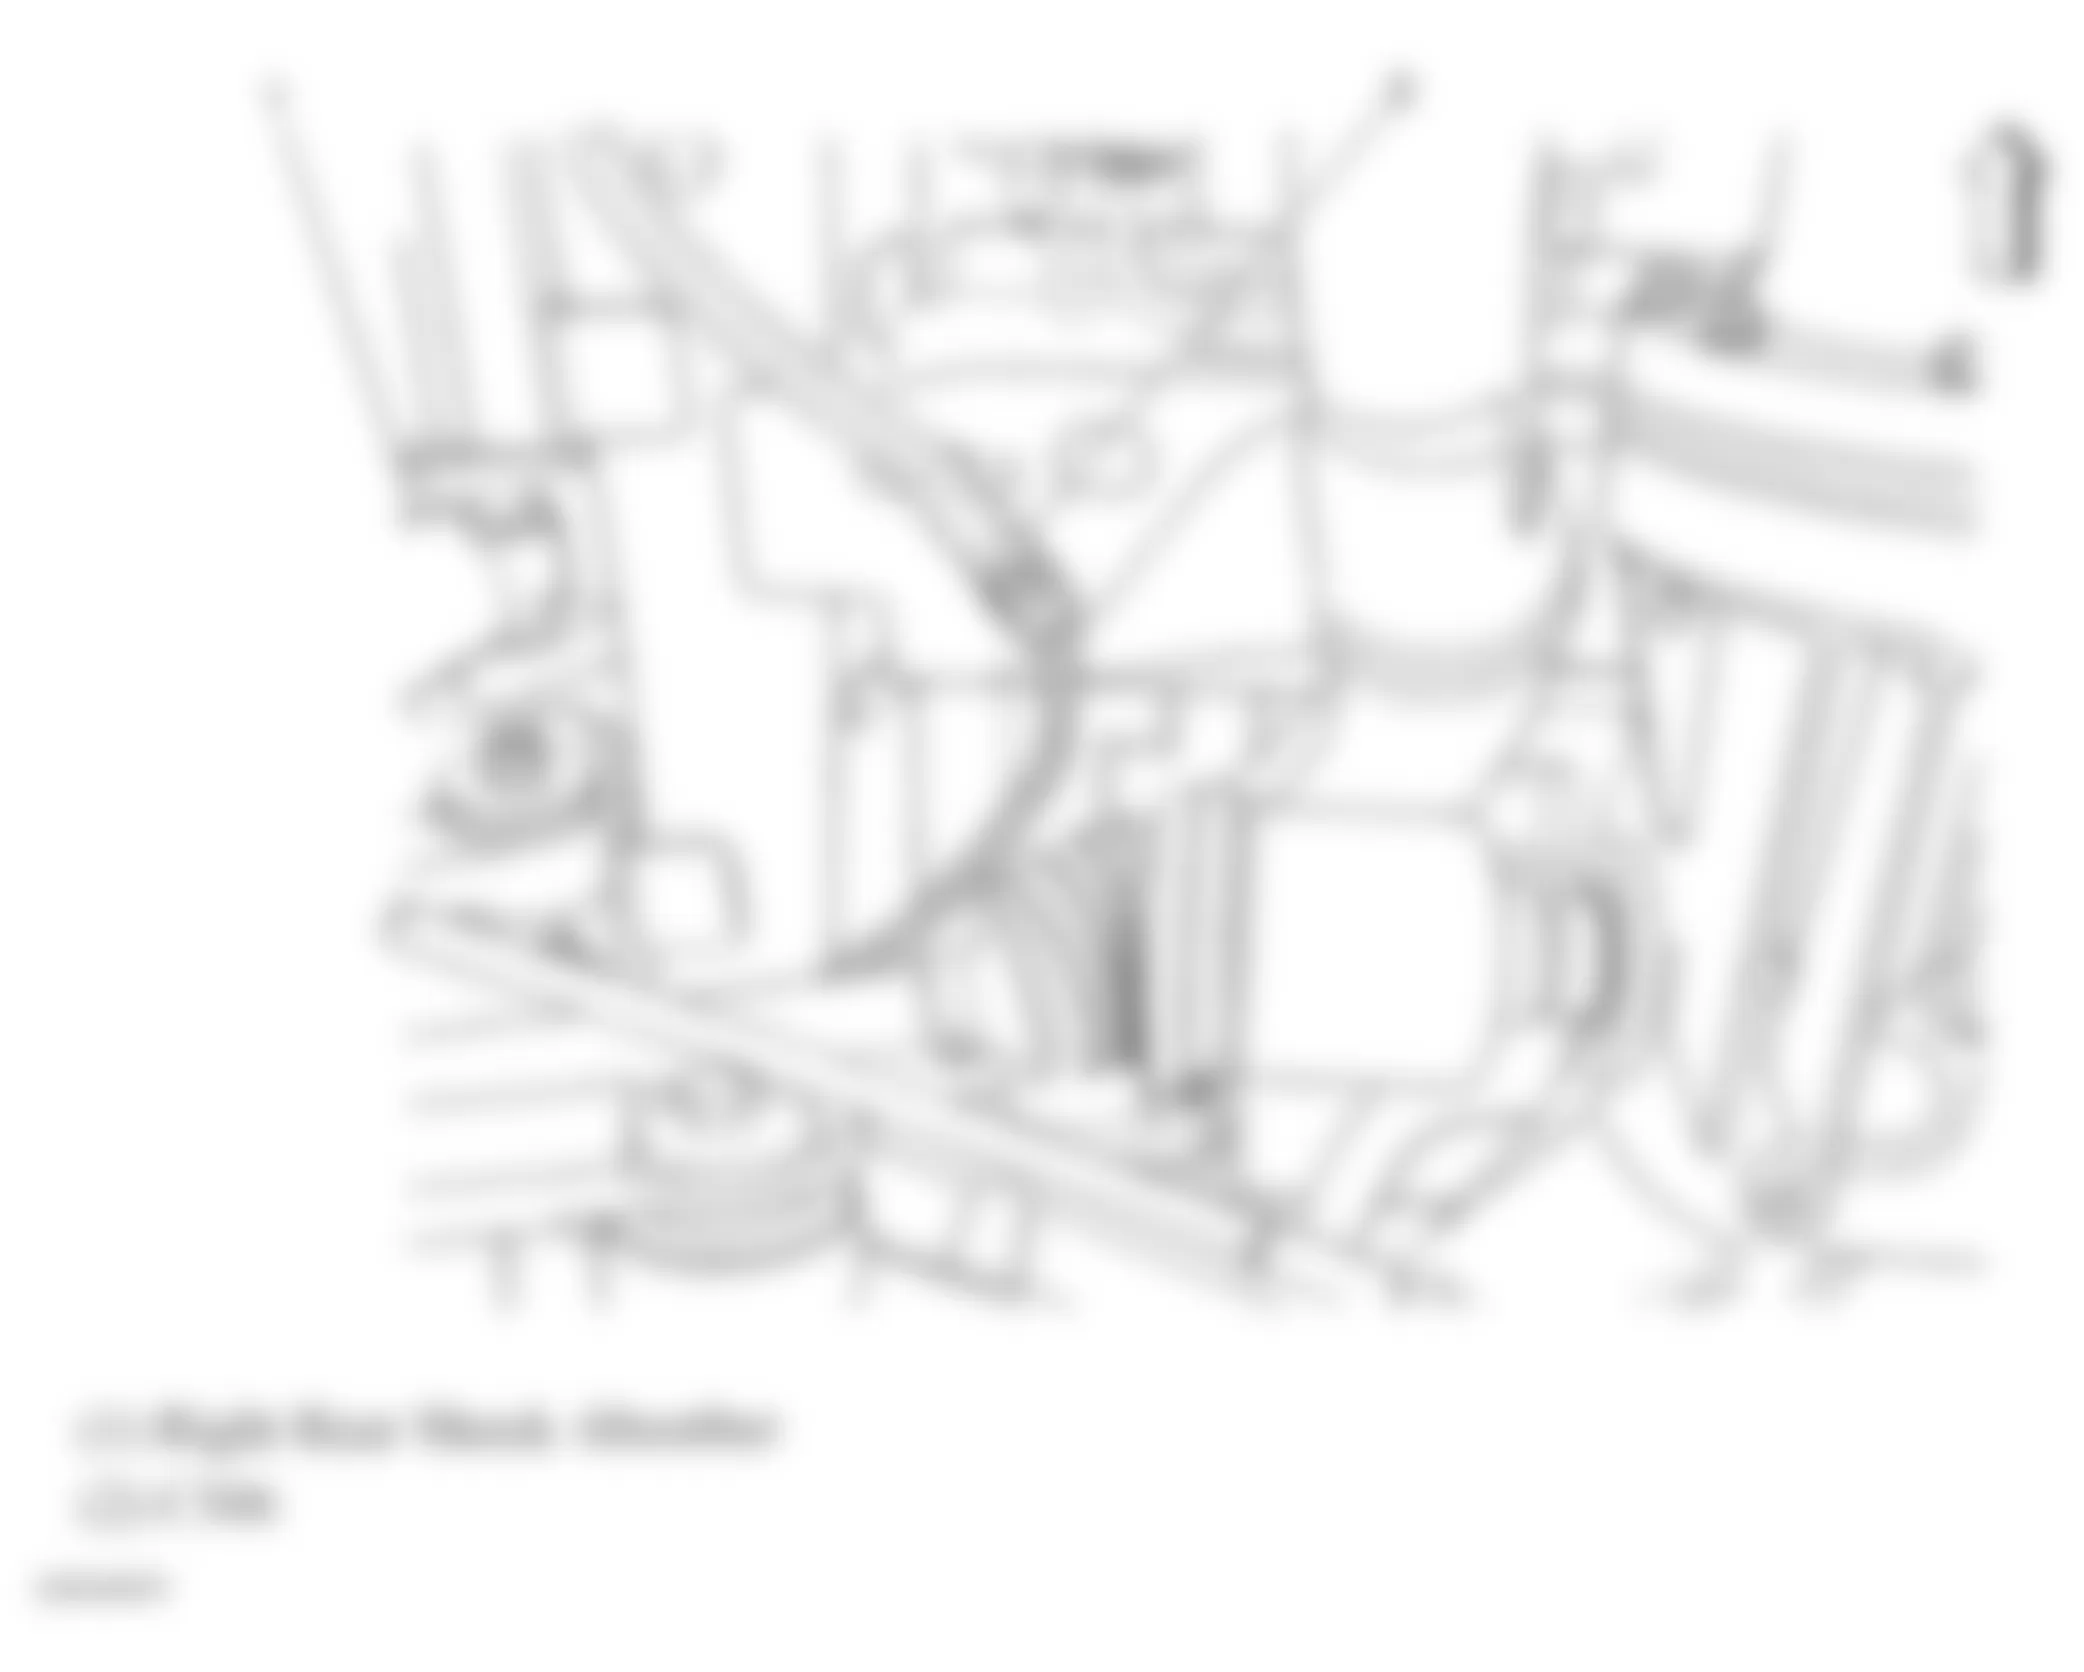 Buick Rendezvous CXL 2007 - Component Locations -  Under Right Rear Of Vehicle